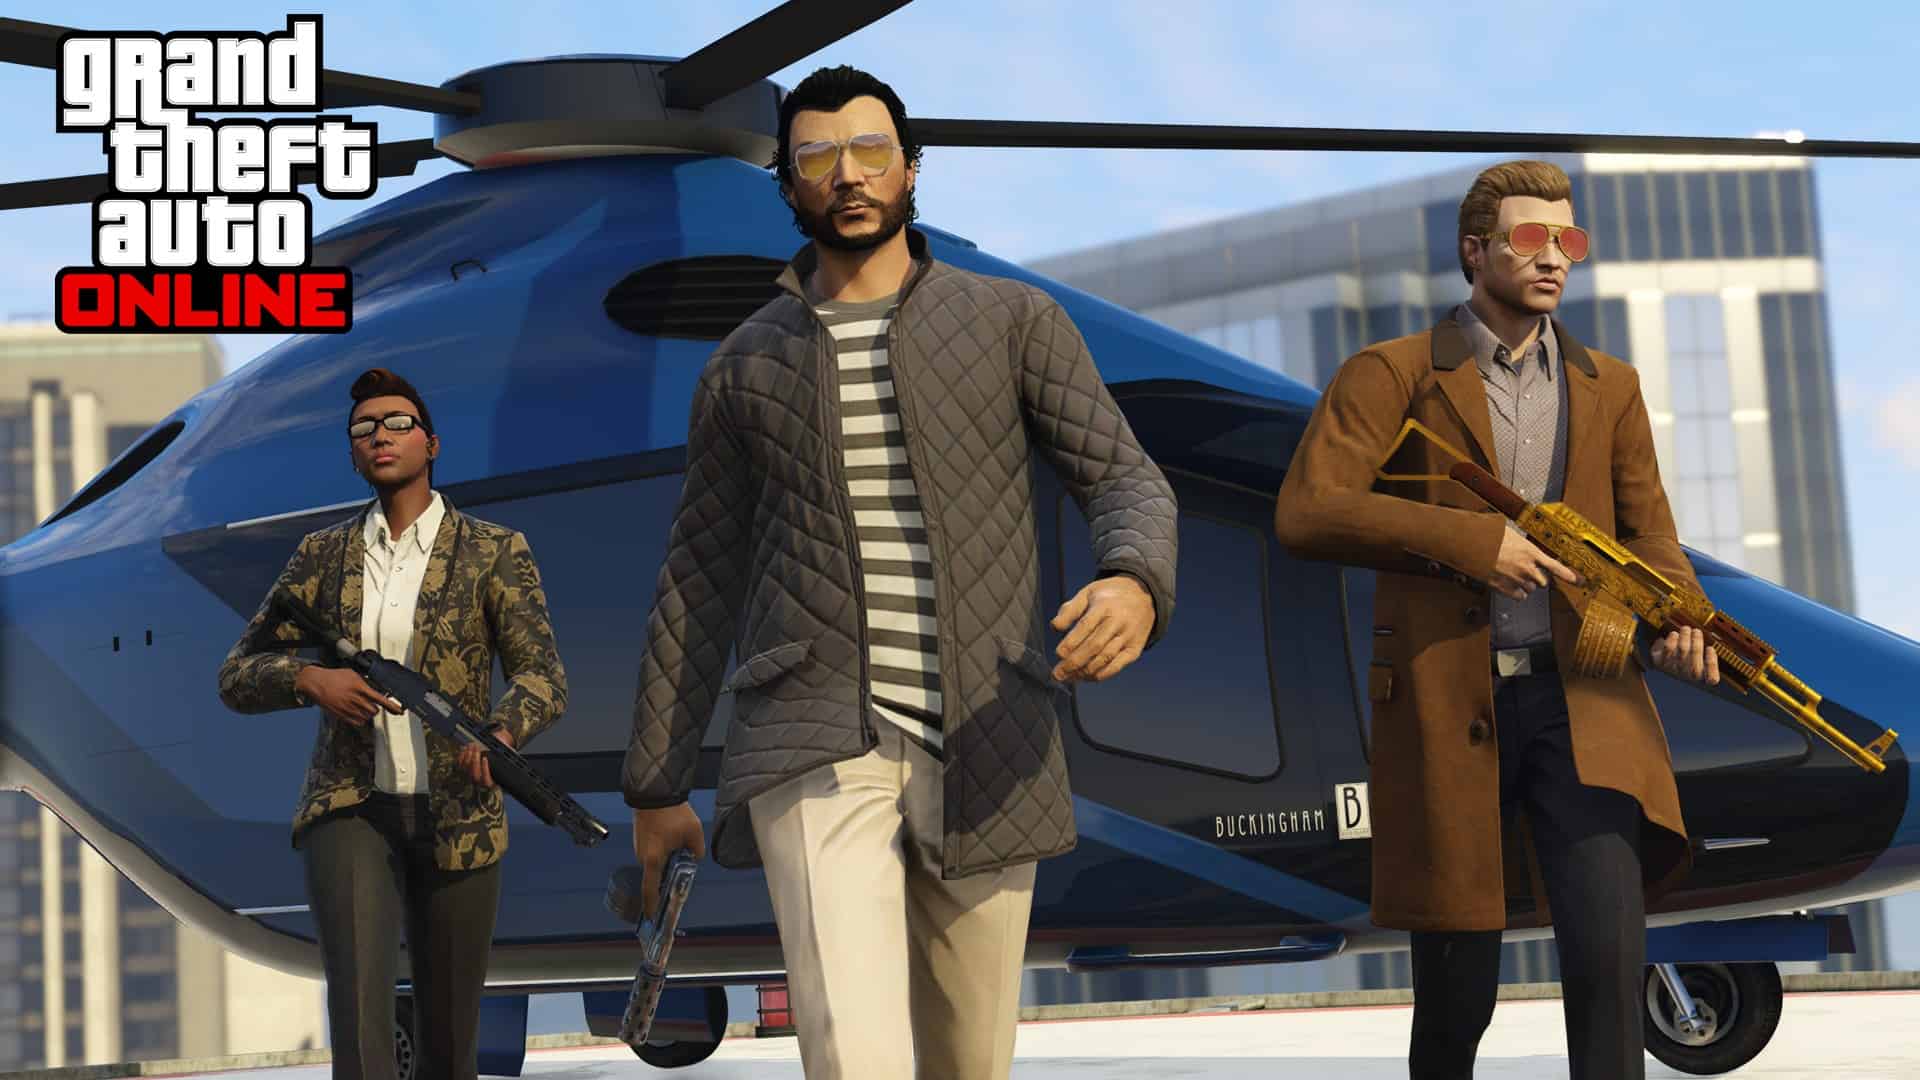 GTA Online characters landing from a helicopter